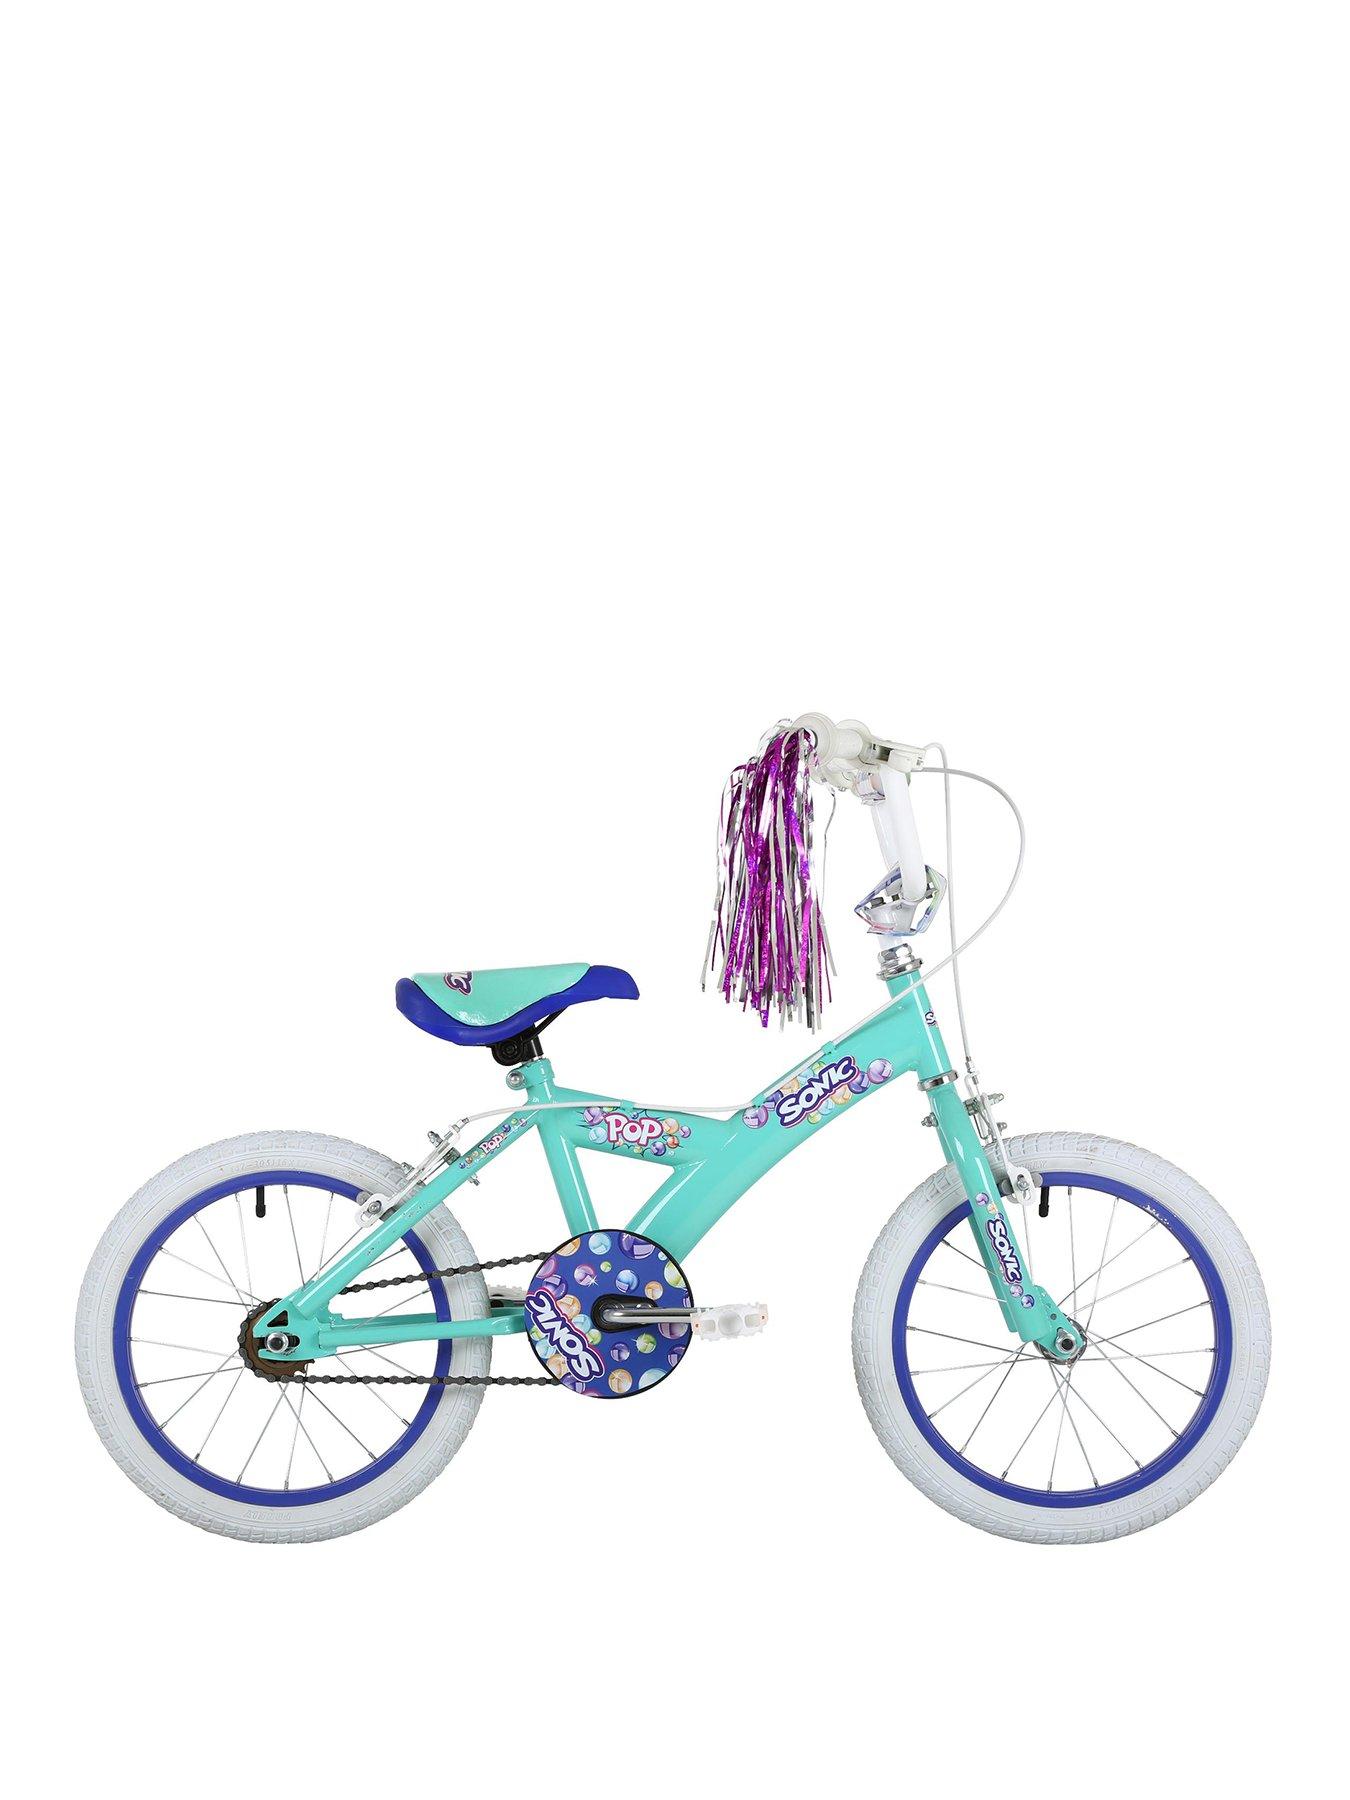 Details about   16 Inch Childrens Bicycle Kids Bike Green With Removable Stabilisers UK 